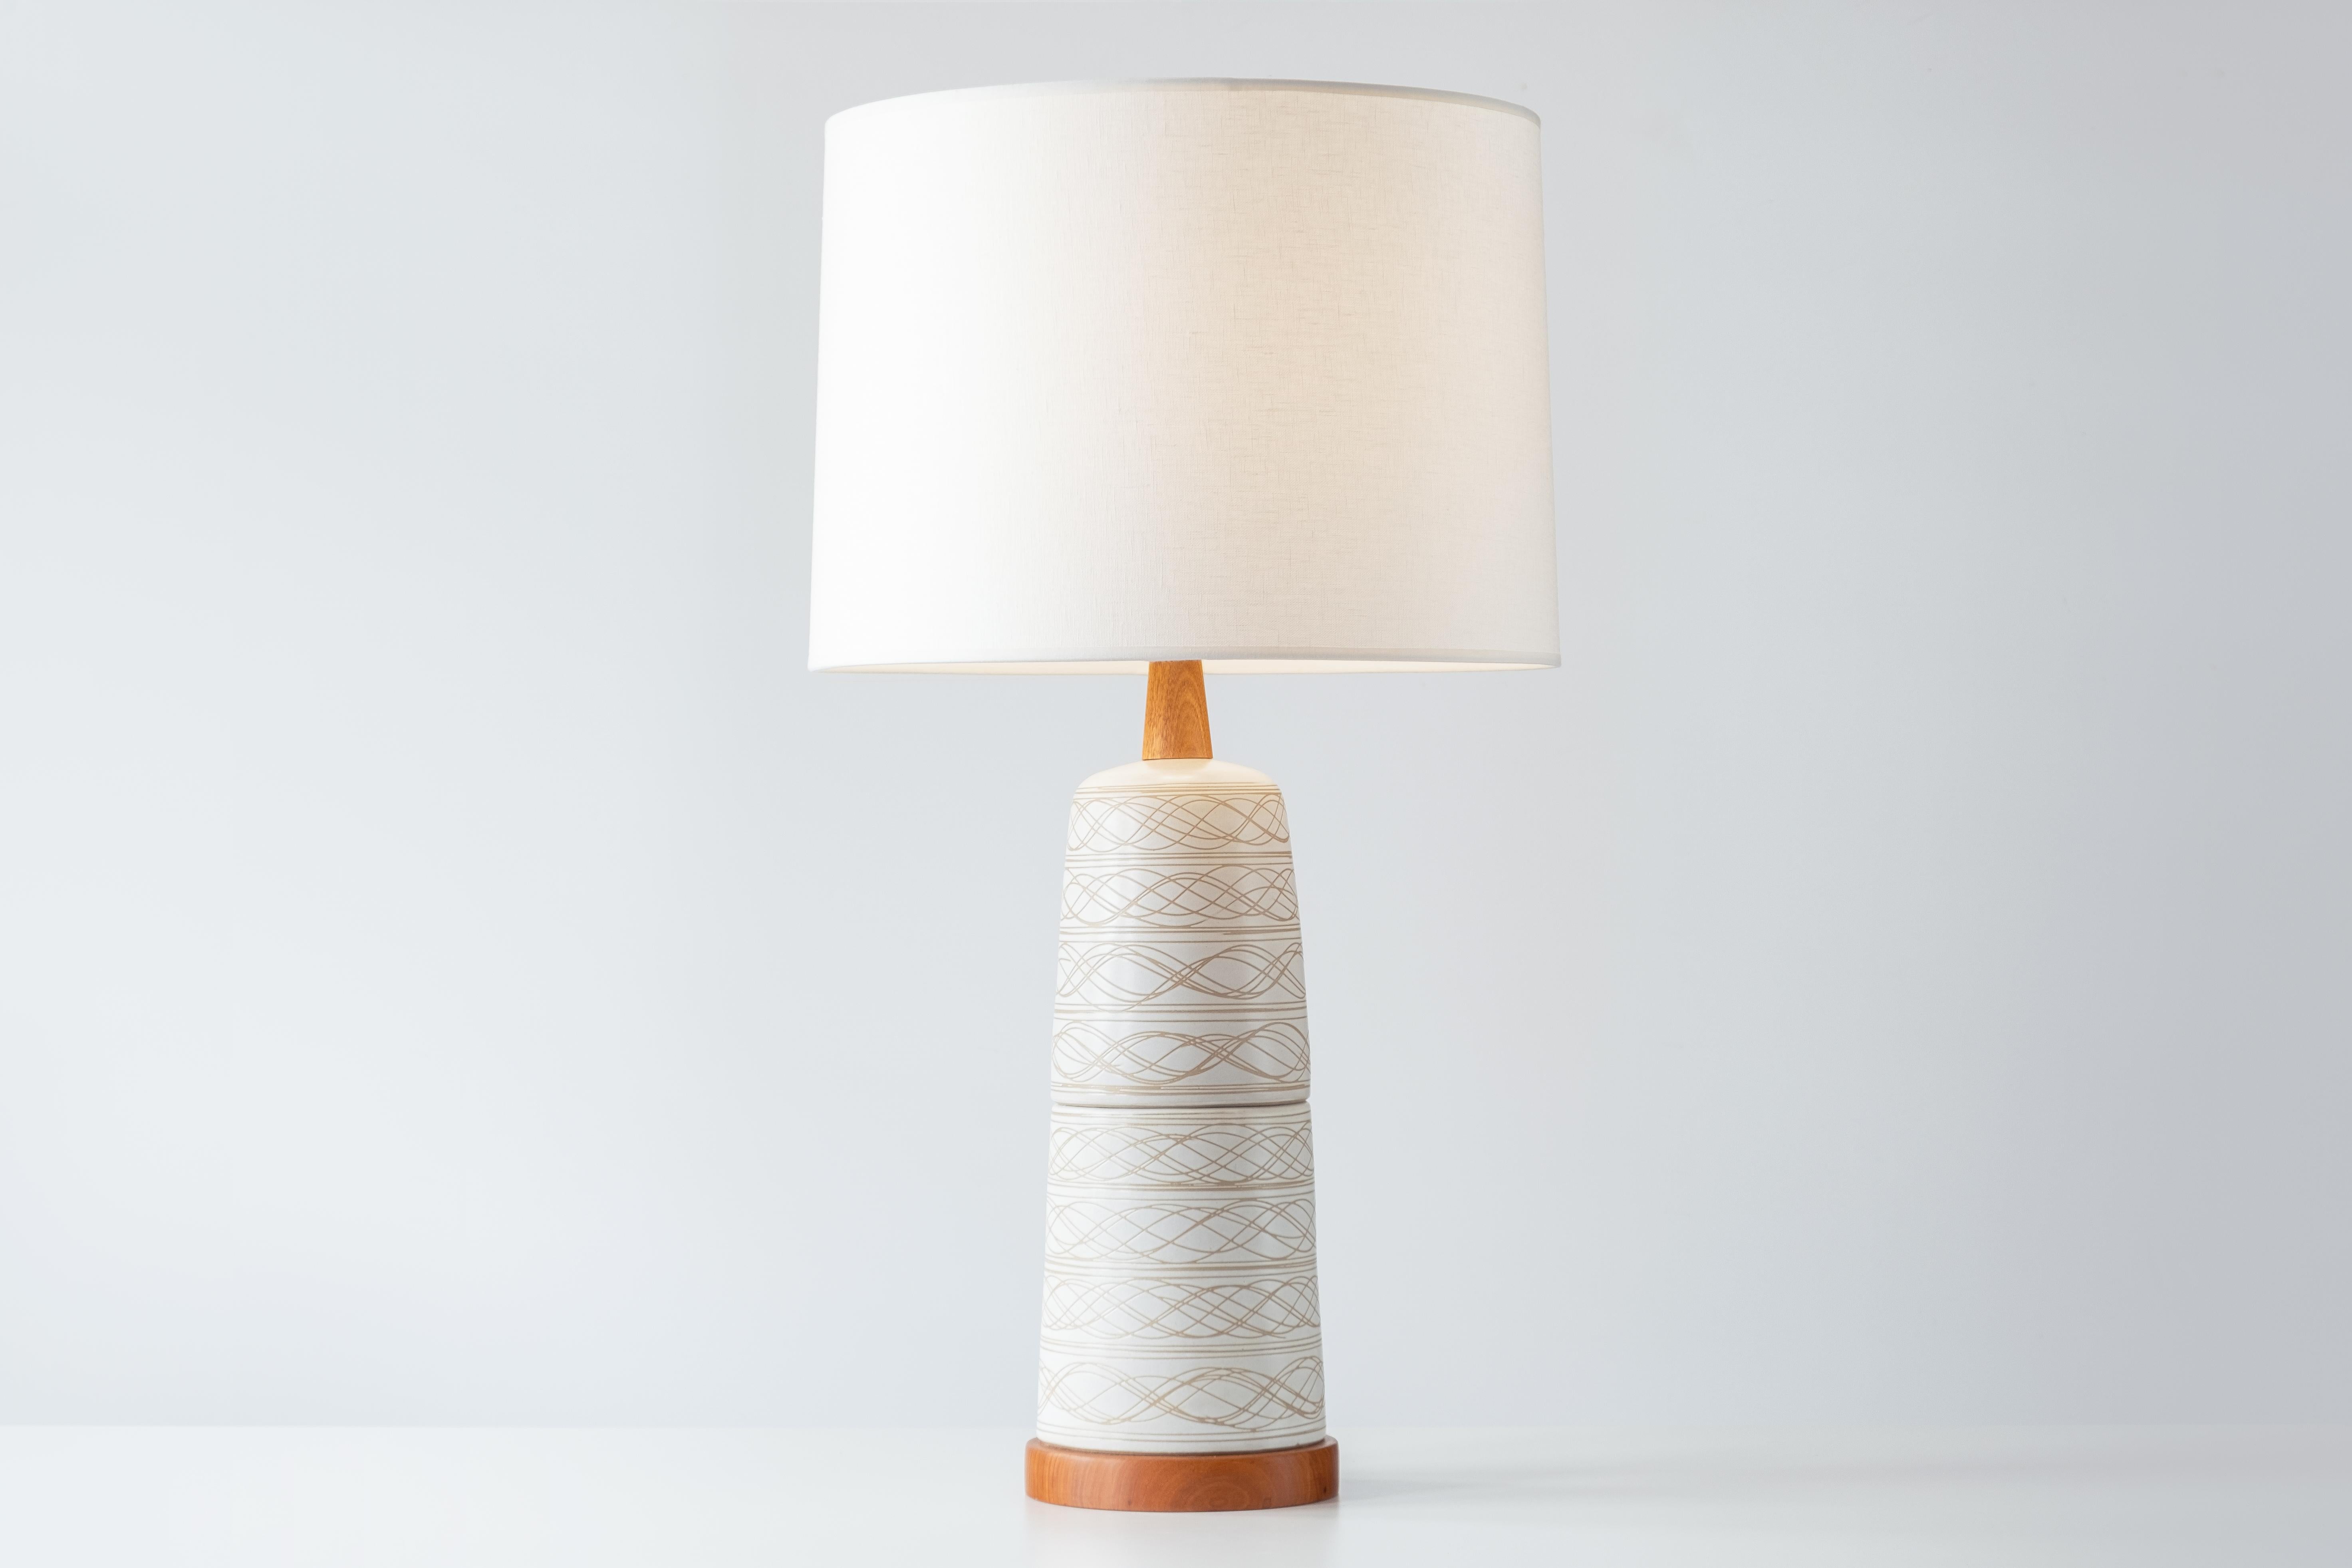 What is it?
—
Another gem from the masters of mid century lightning – Gordon and Jane Martz. Not too big, not too small – this ceramic lamp is equally at home on an end table or credenza as it is on a dresser or bedside table.

This signed Martz